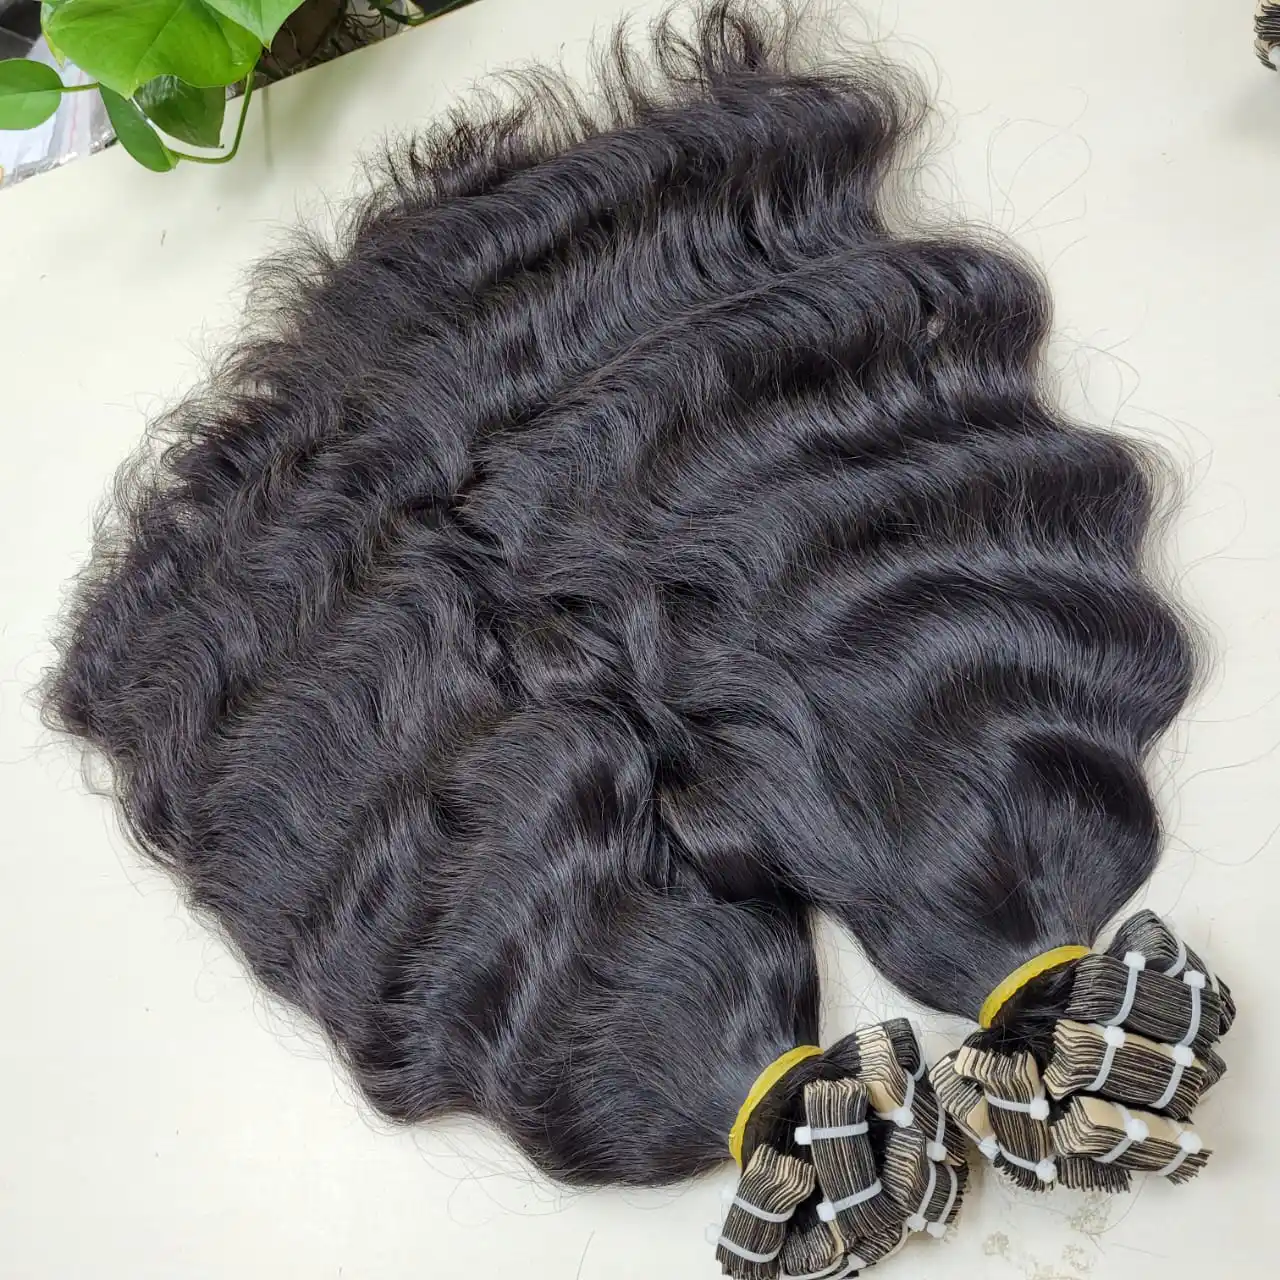 Hair Tape Extension Extensions 100% Human Remy Virgin Hair Vendors 28 Inch Seamless Tape Hair